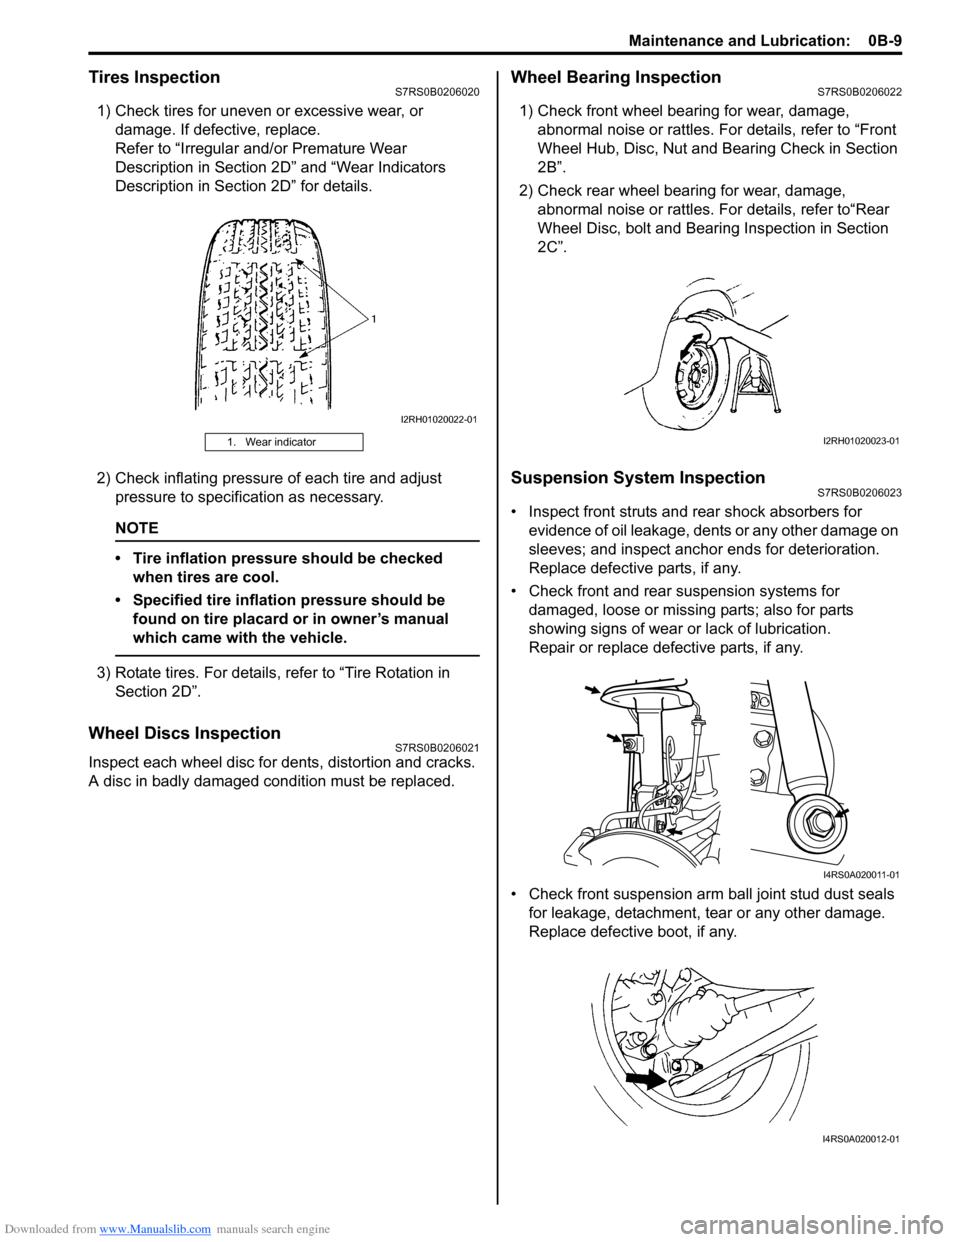 SUZUKI SWIFT 2007 2.G Service Workshop Manual Downloaded from www.Manualslib.com manuals search engine Maintenance and Lubrication:  0B-9
Tires InspectionS7RS0B0206020
1) Check tires for uneven or excessive wear, or damage. If defective, replace.